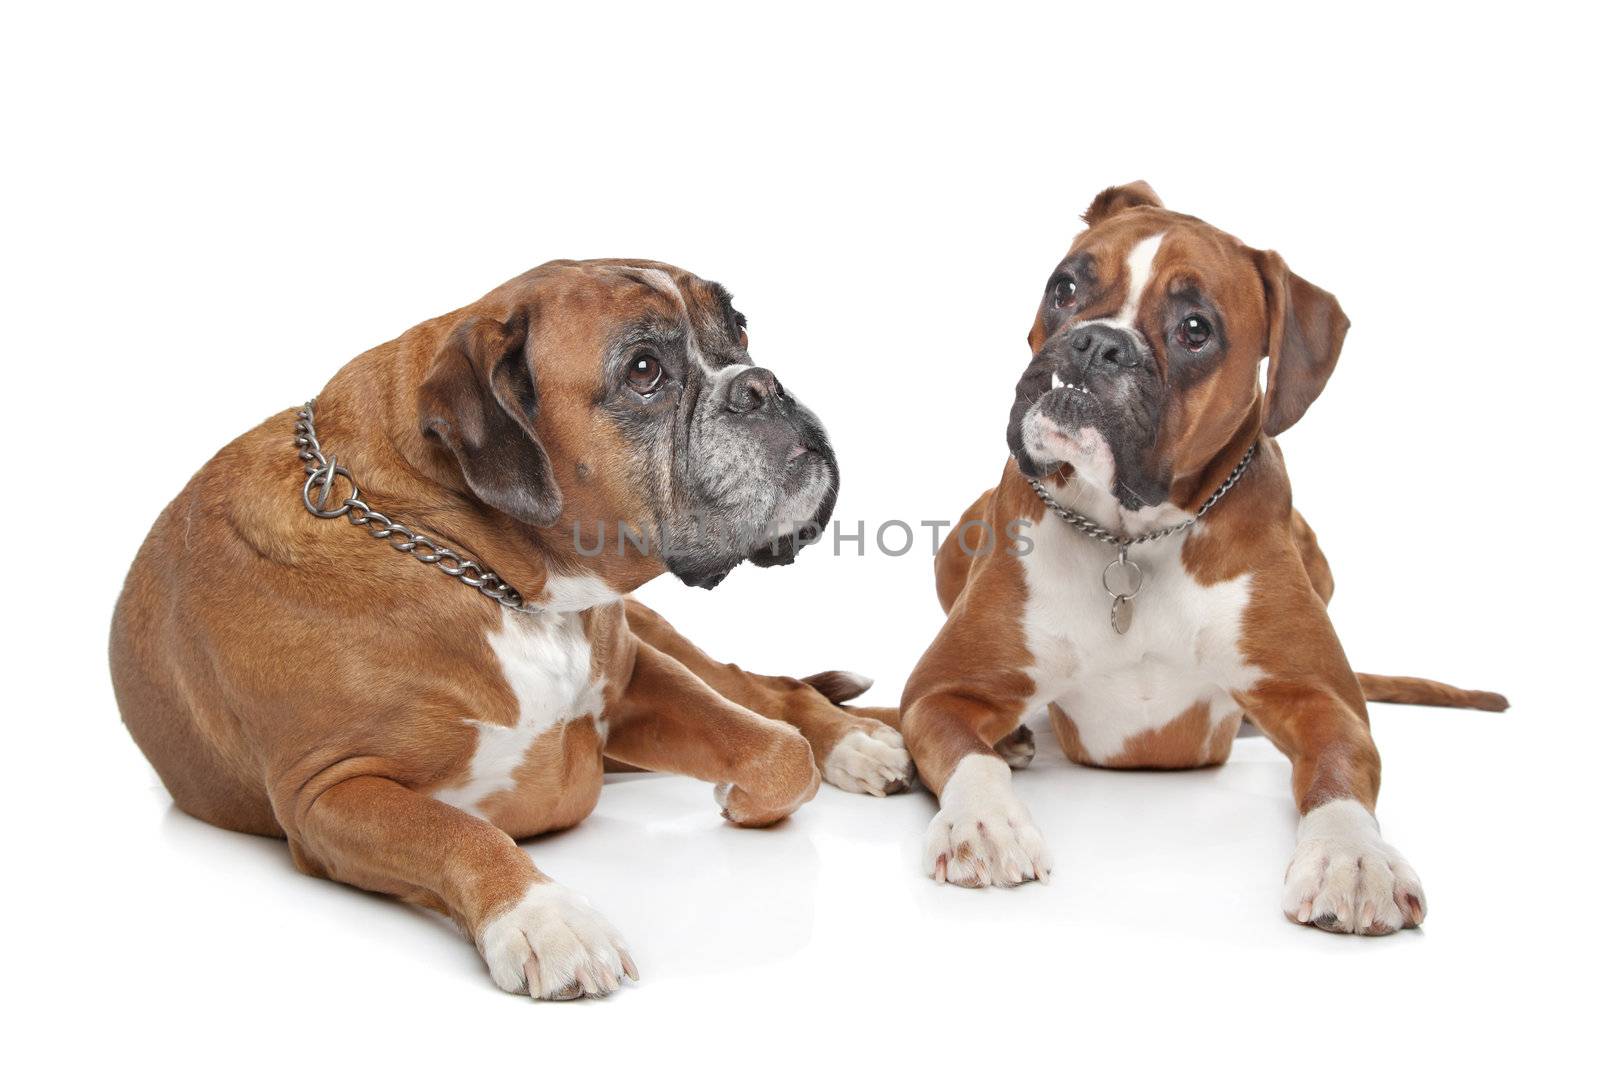 Two plain fawn Boxer dogs in front of a white background